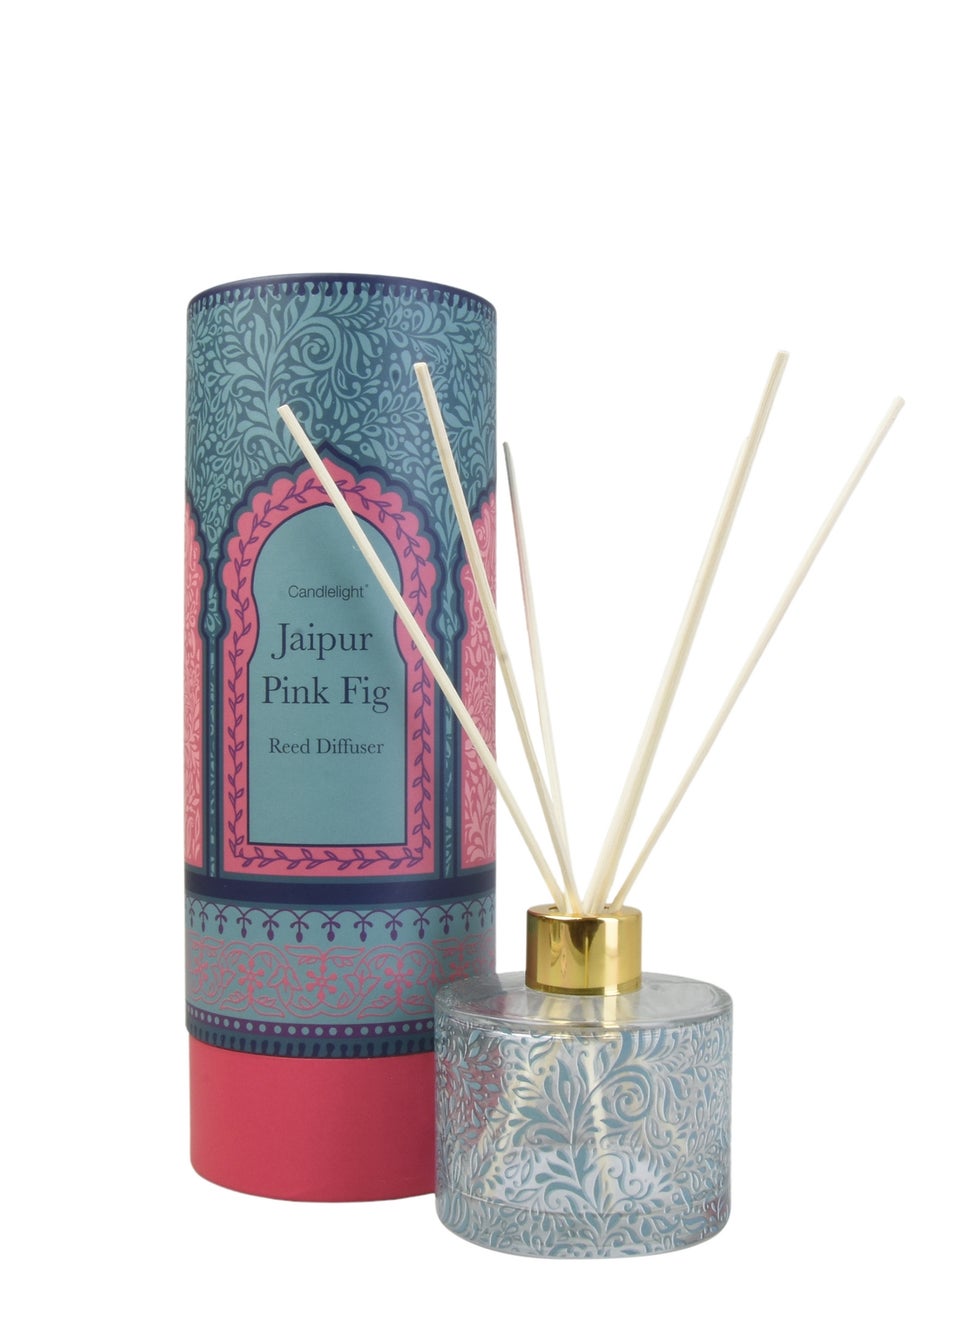 Candlelight Jaipur Pink Fig Reed Diffuser (150ml)